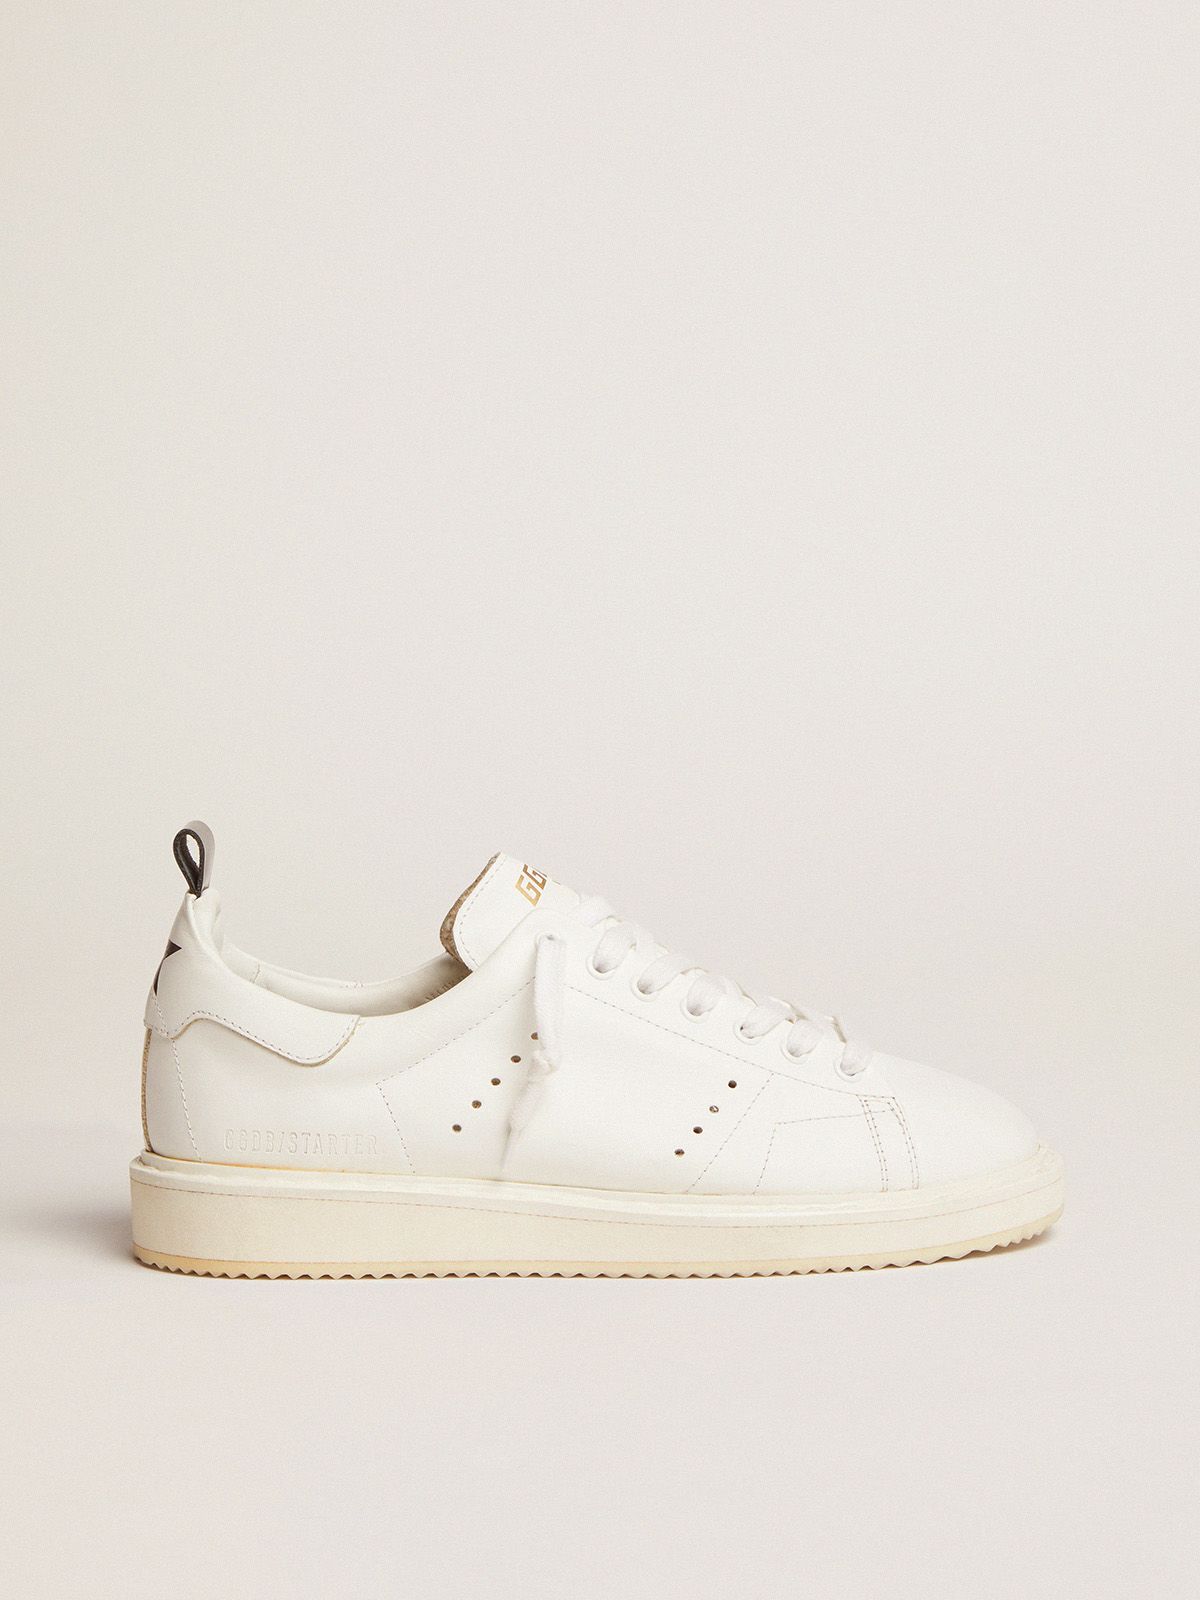 golden goose white Starter total leather sneakers in